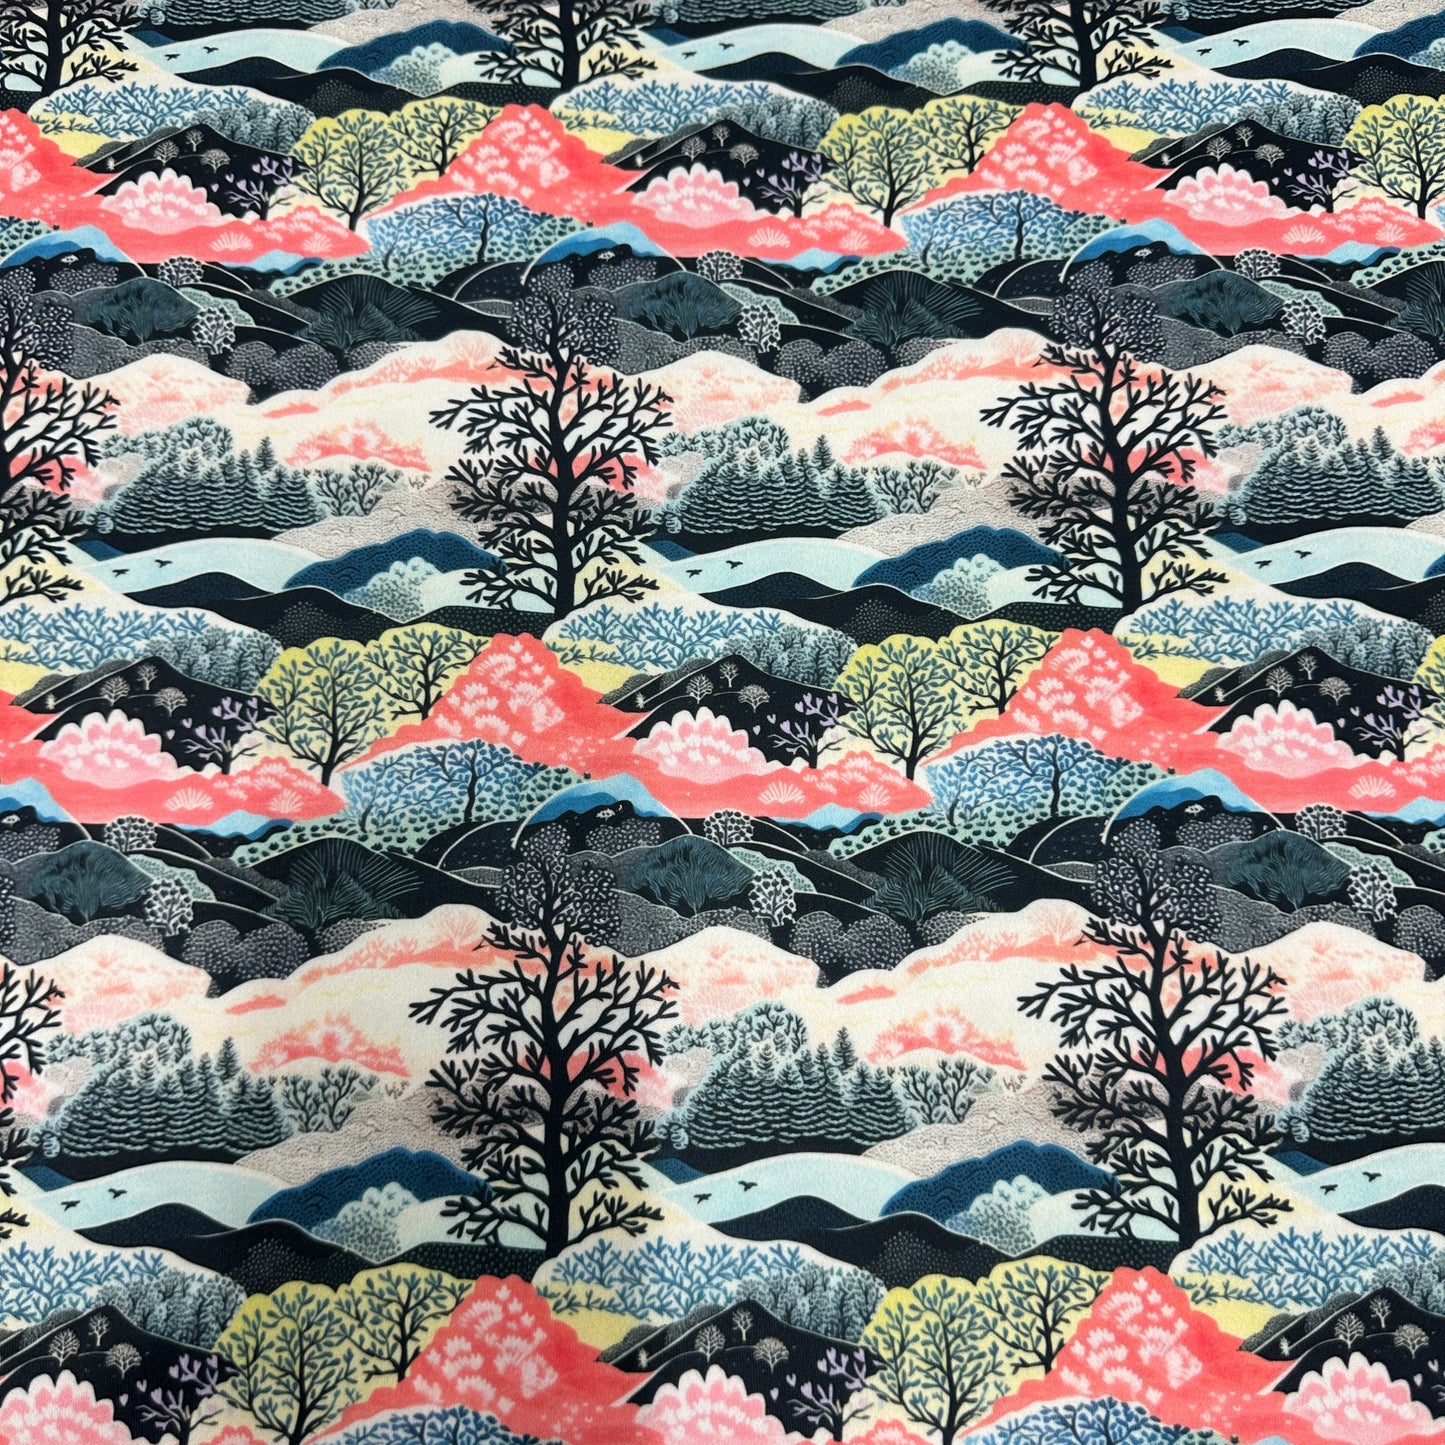 Woodblock Forest 1 mil PUL Fabric - Made in the USA